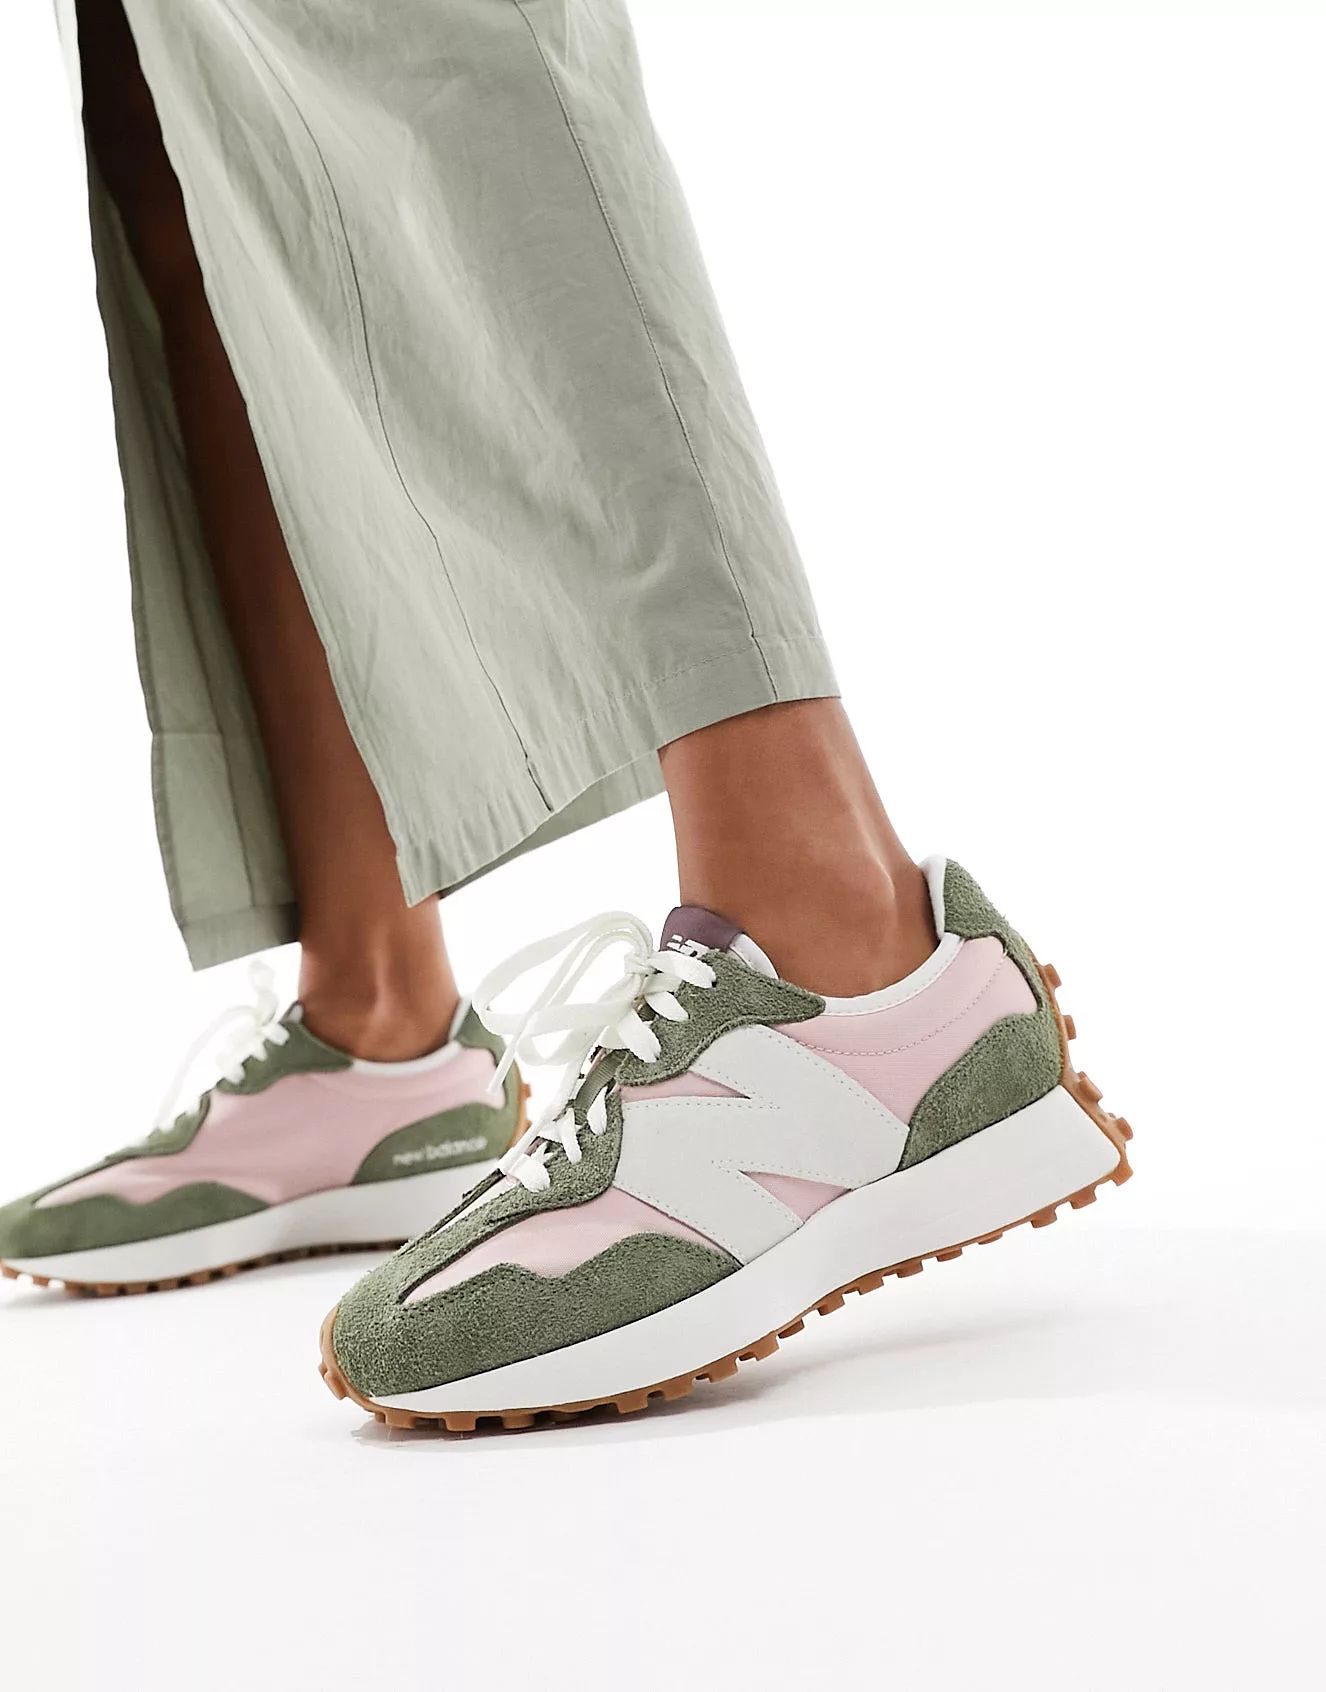 New Balance 327 sneakers in khaki with pink details | ASOS | ASOS (Global)